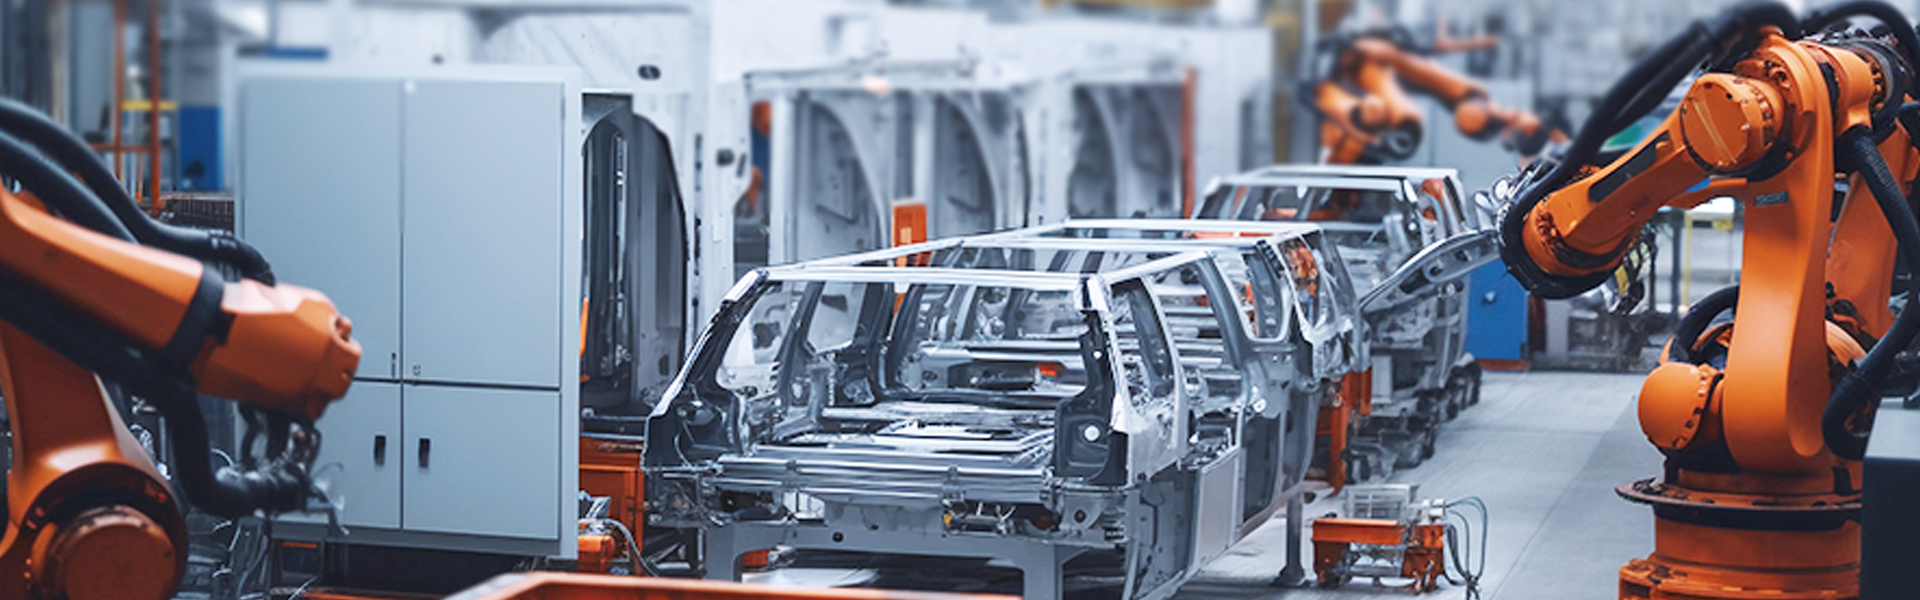 Revolutionizing Automotive Mold Manufacturing with Scantech’s 3D Scanning Solutions